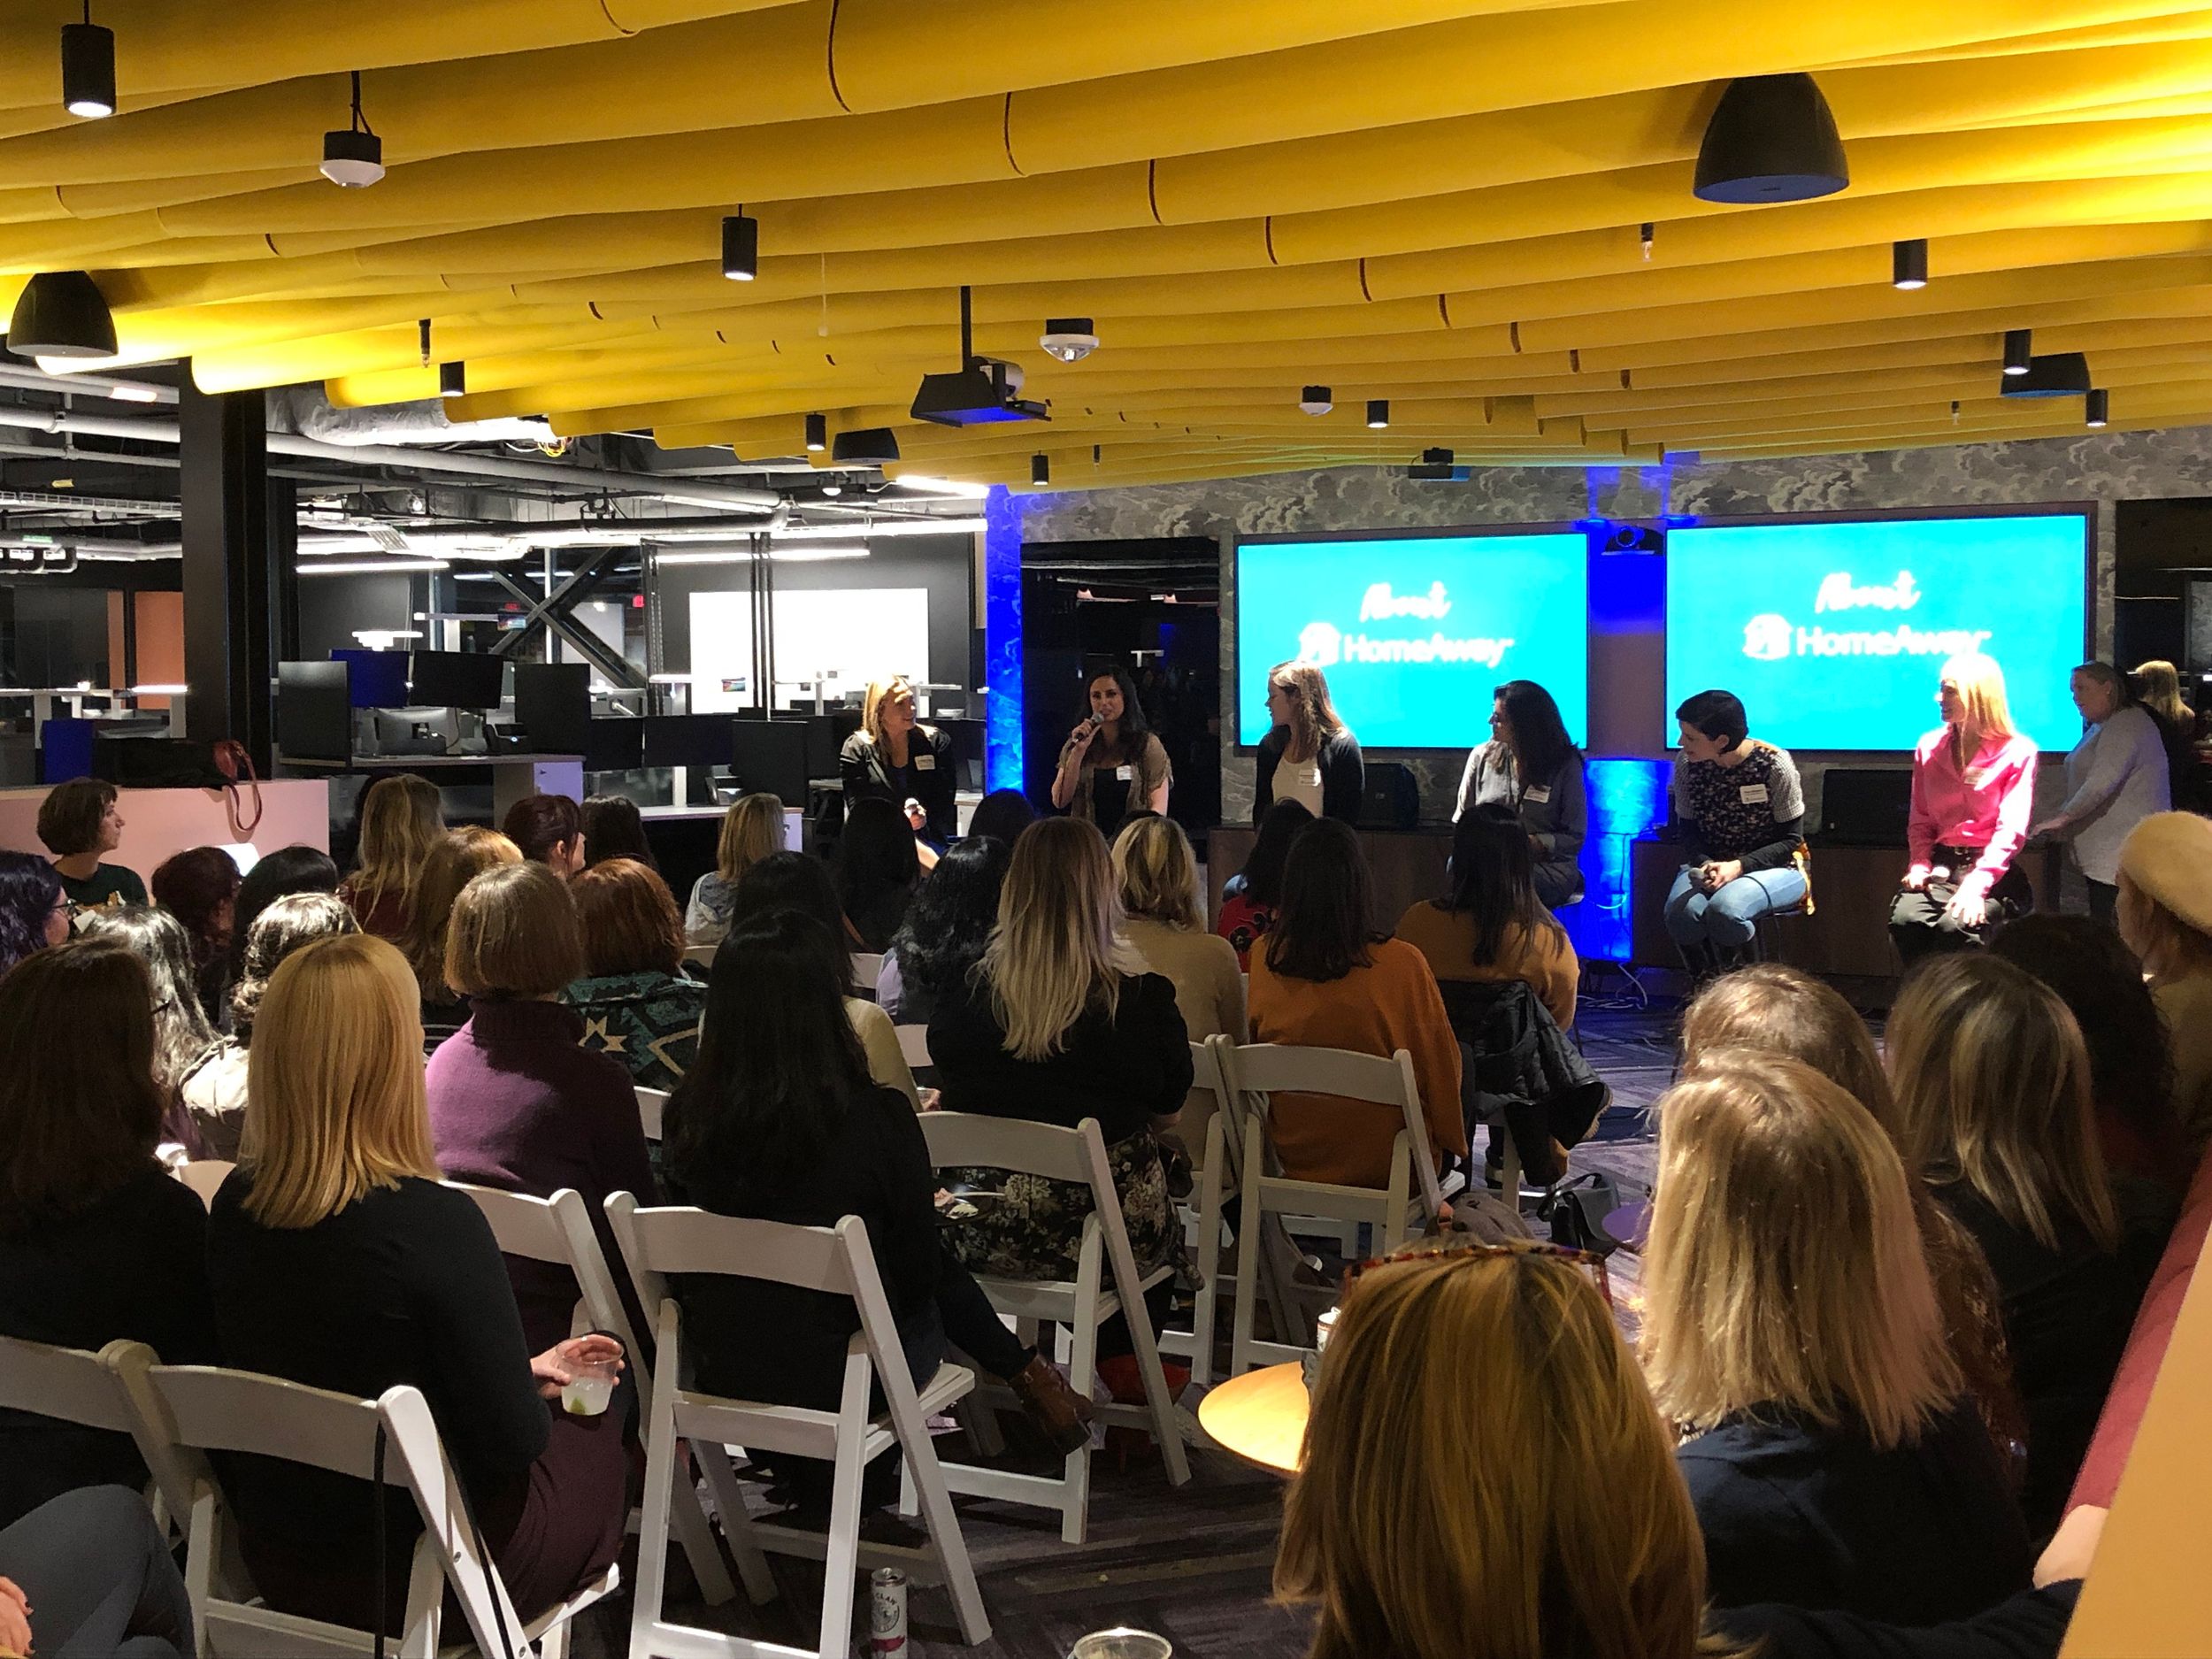 An Inside Look at Our Event with HomeAway's (now Vrbo) Women In Tech